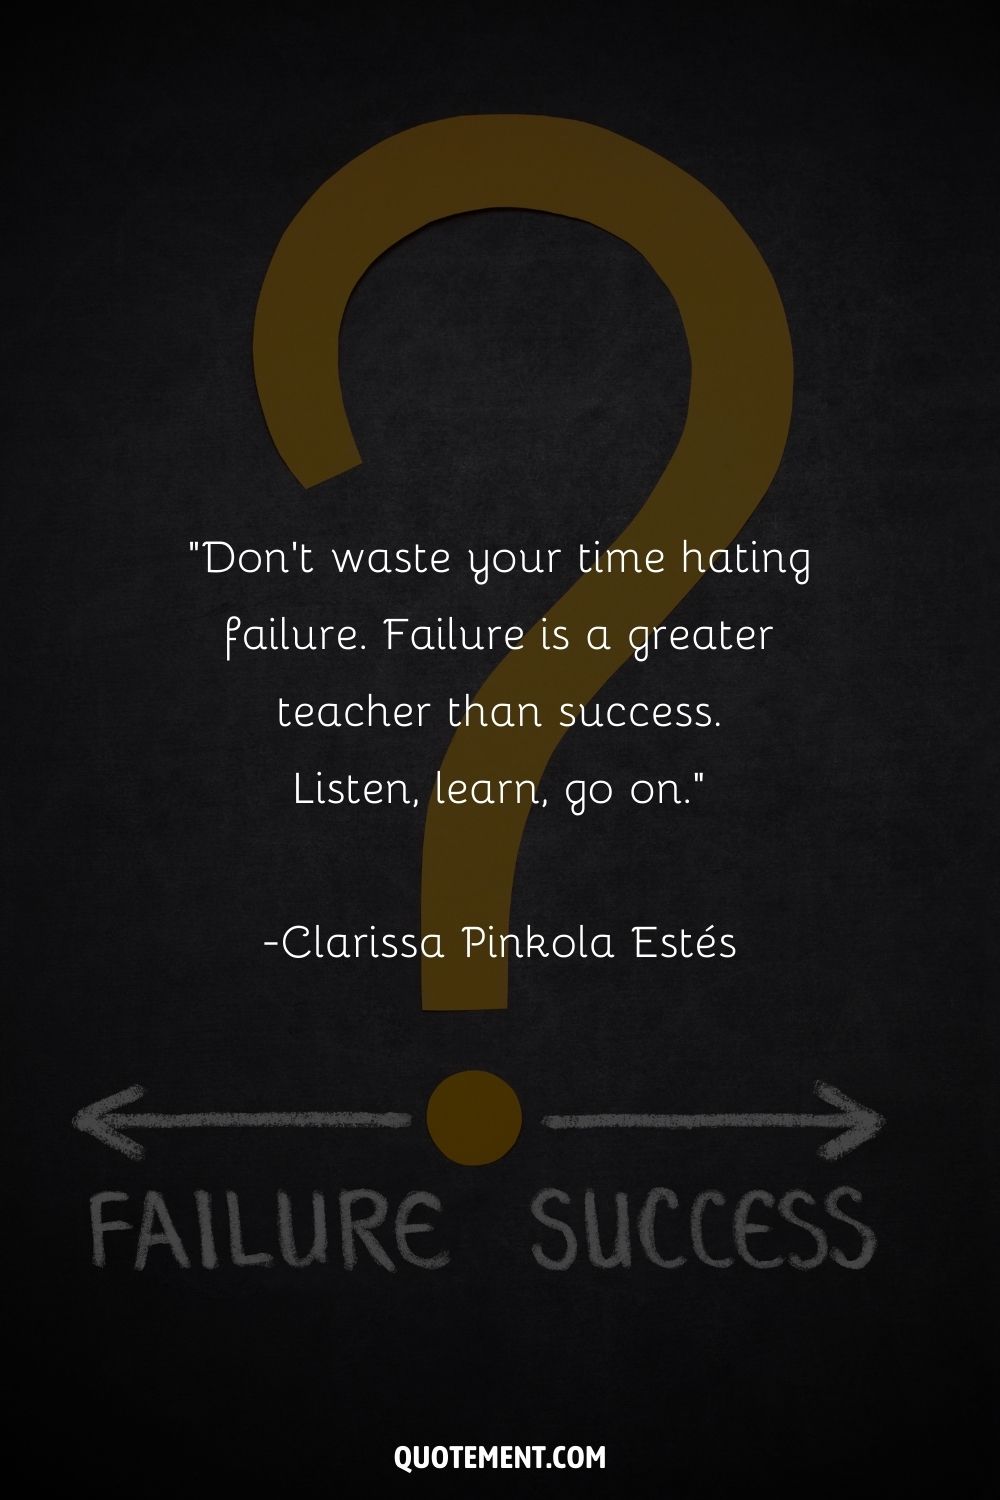 “Don't waste your time hating failure. Failure is a greater teacher than success. Listen, learn, go on.” ― Clarissa Pinkola Estés, Women Who Run With the Wolves